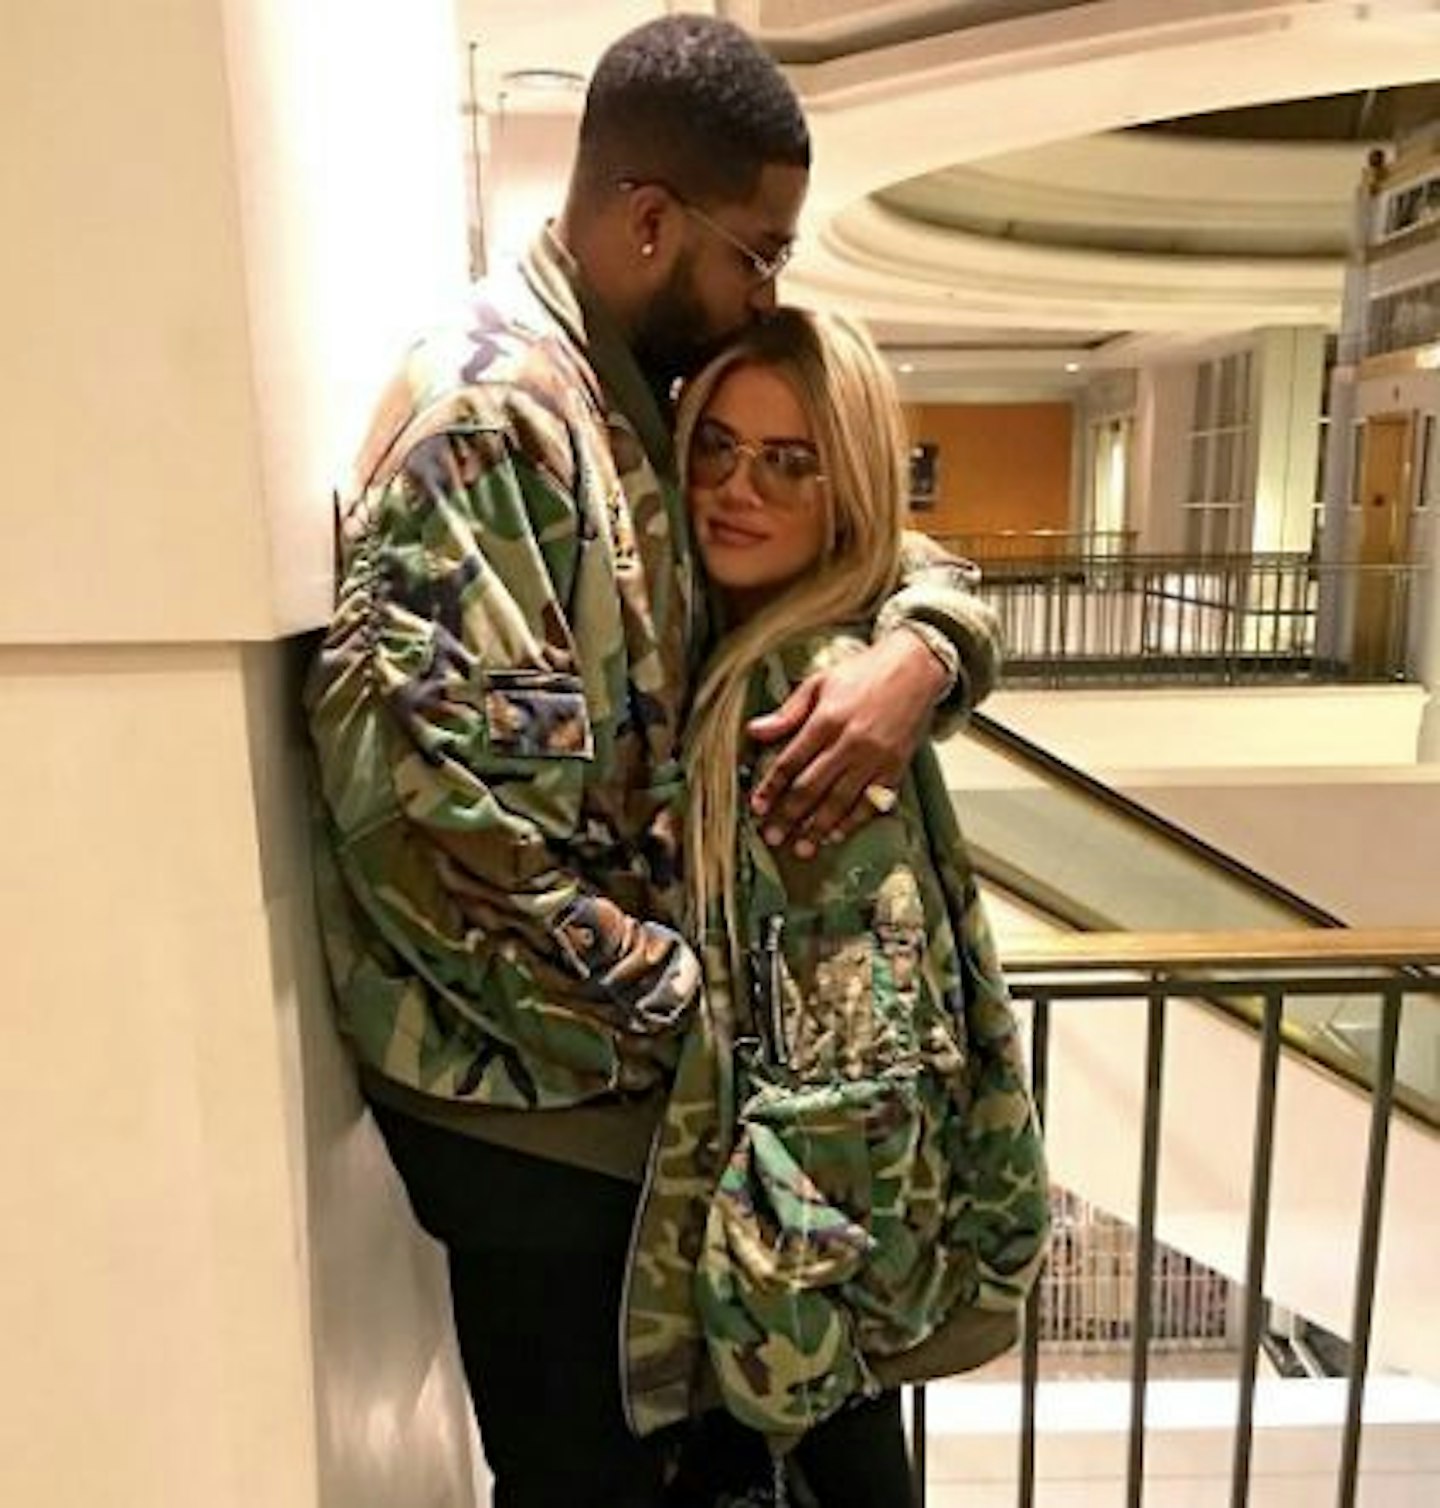 Khloe and Tristan 